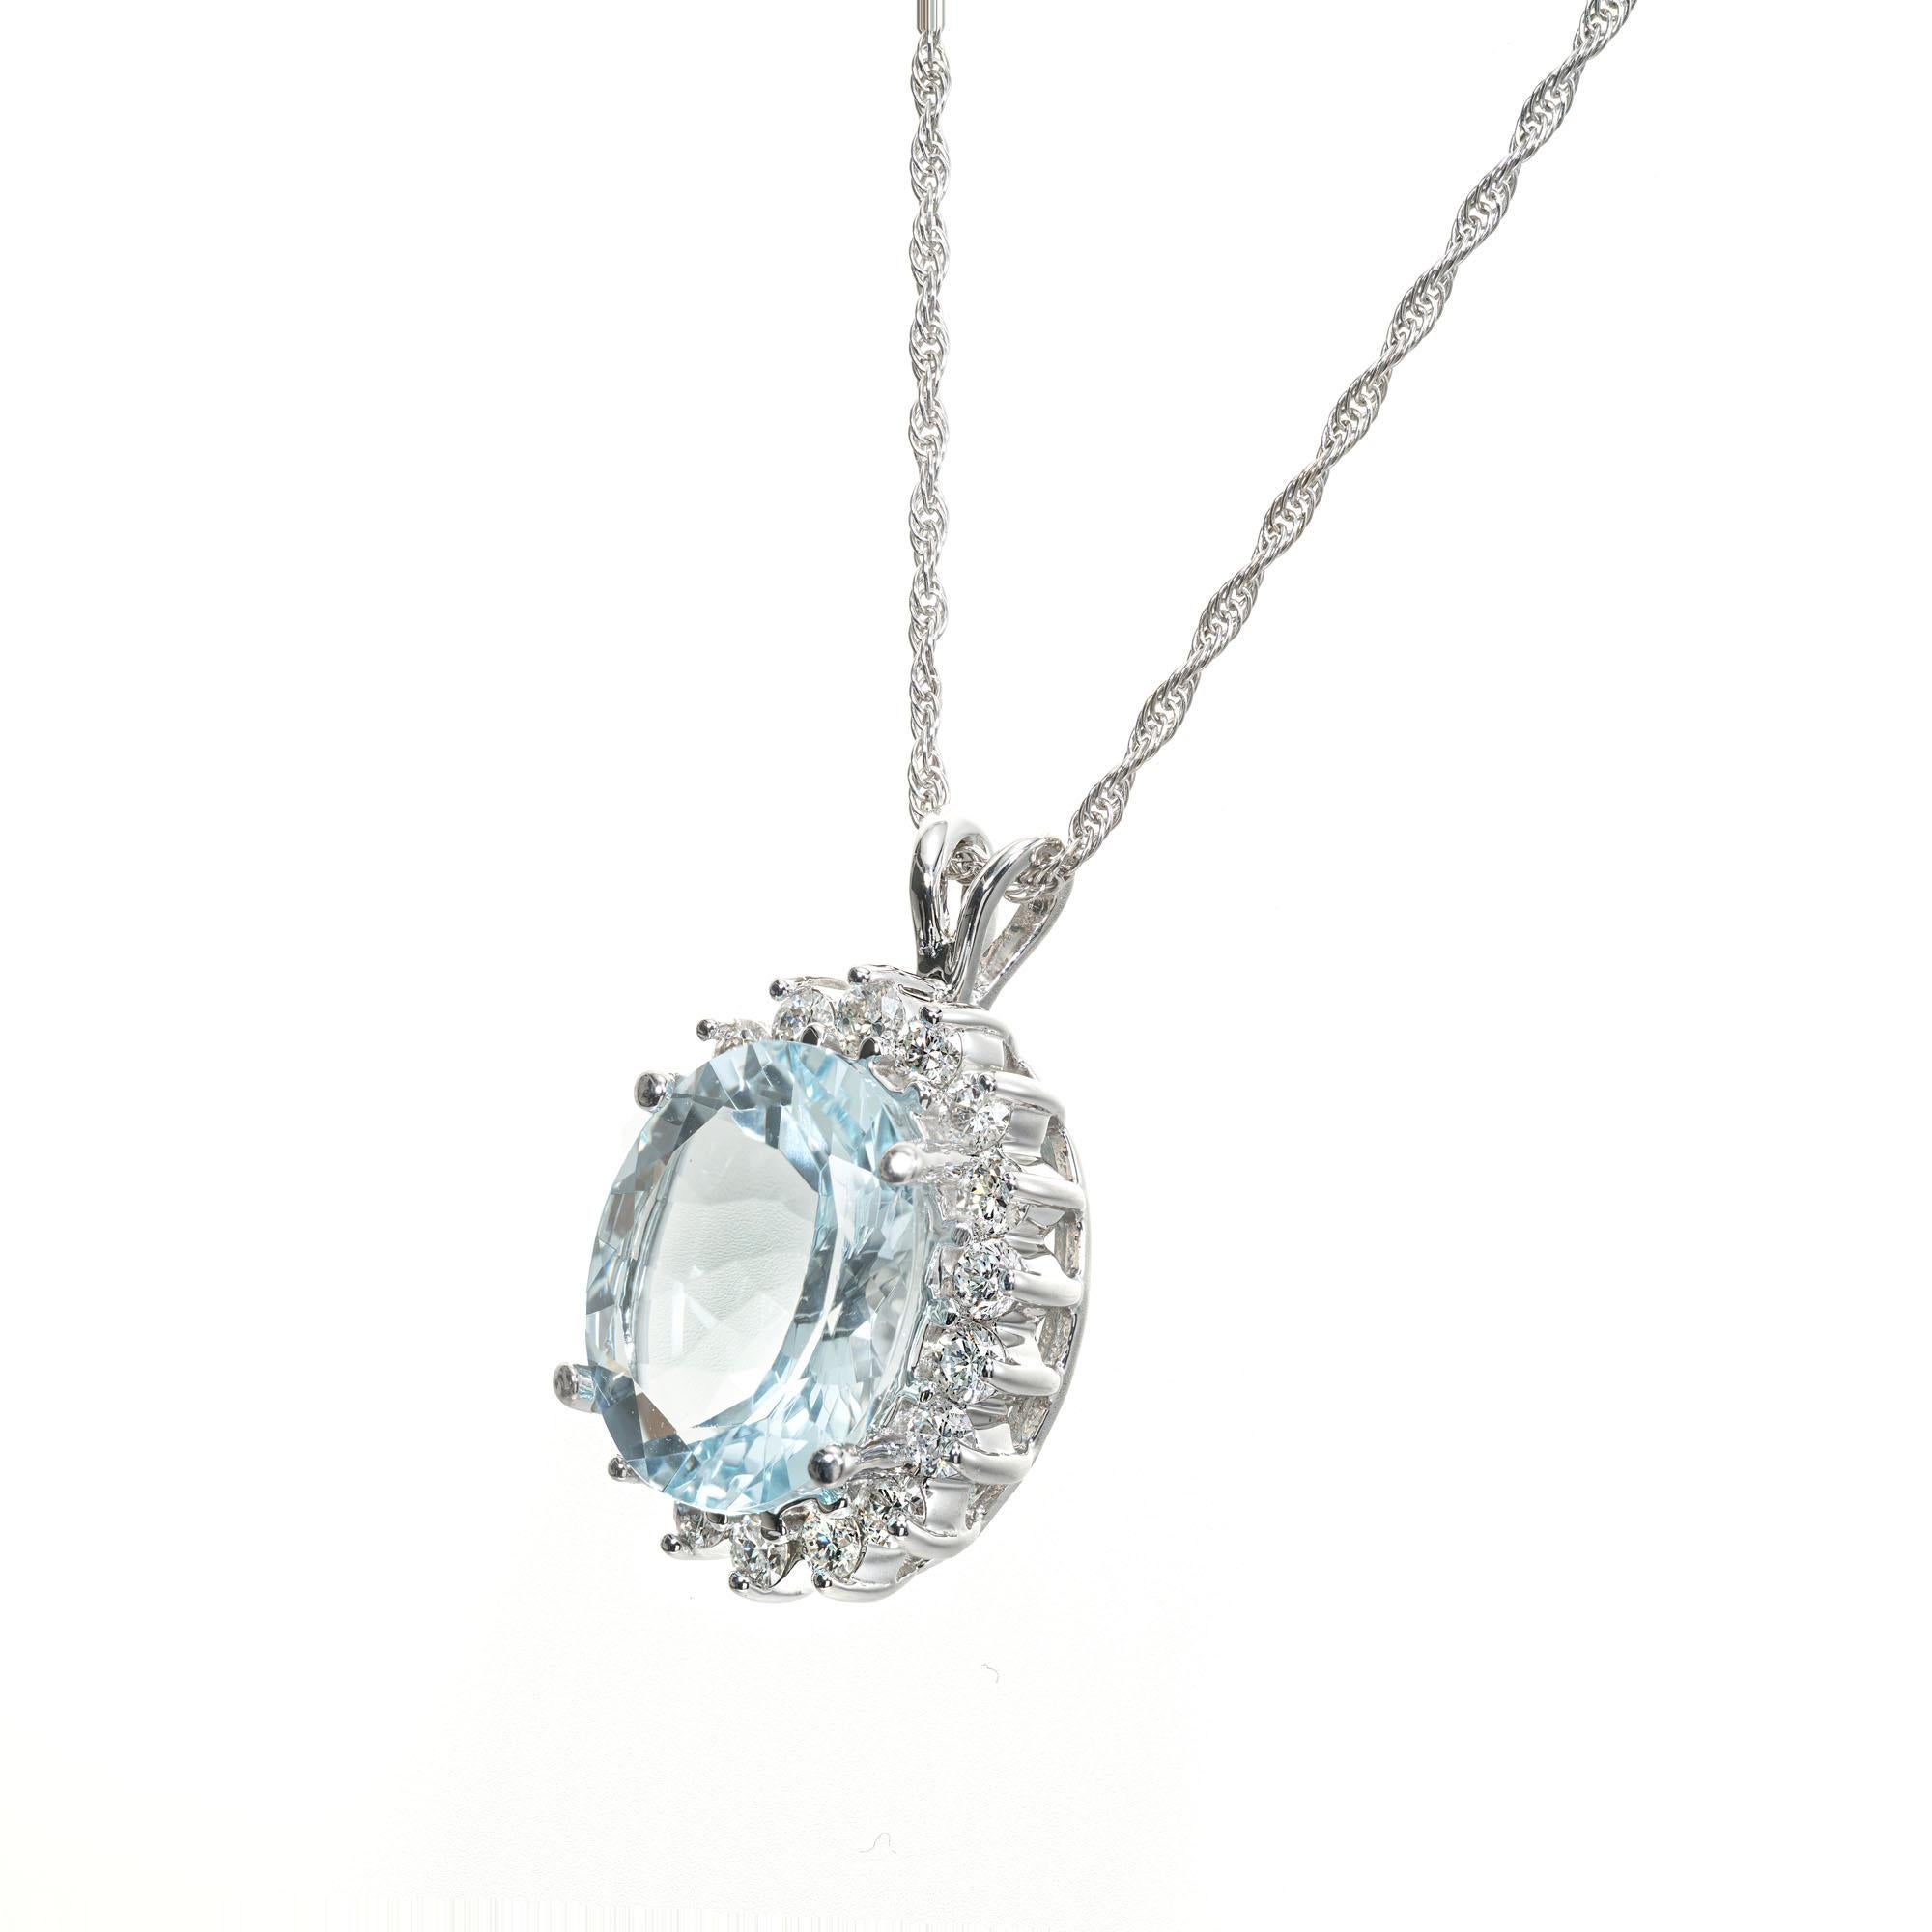 1960's Aqua and diamond halo pendant necklace. 5.50ct natural untreated oval aqua surrounded by 18 round brilliant cut accent diamonds in 14k white gold. 18 inch chain. 

1 oval cut blue aquamarine, VS approx. 5.50cts
18 round brilliant cut